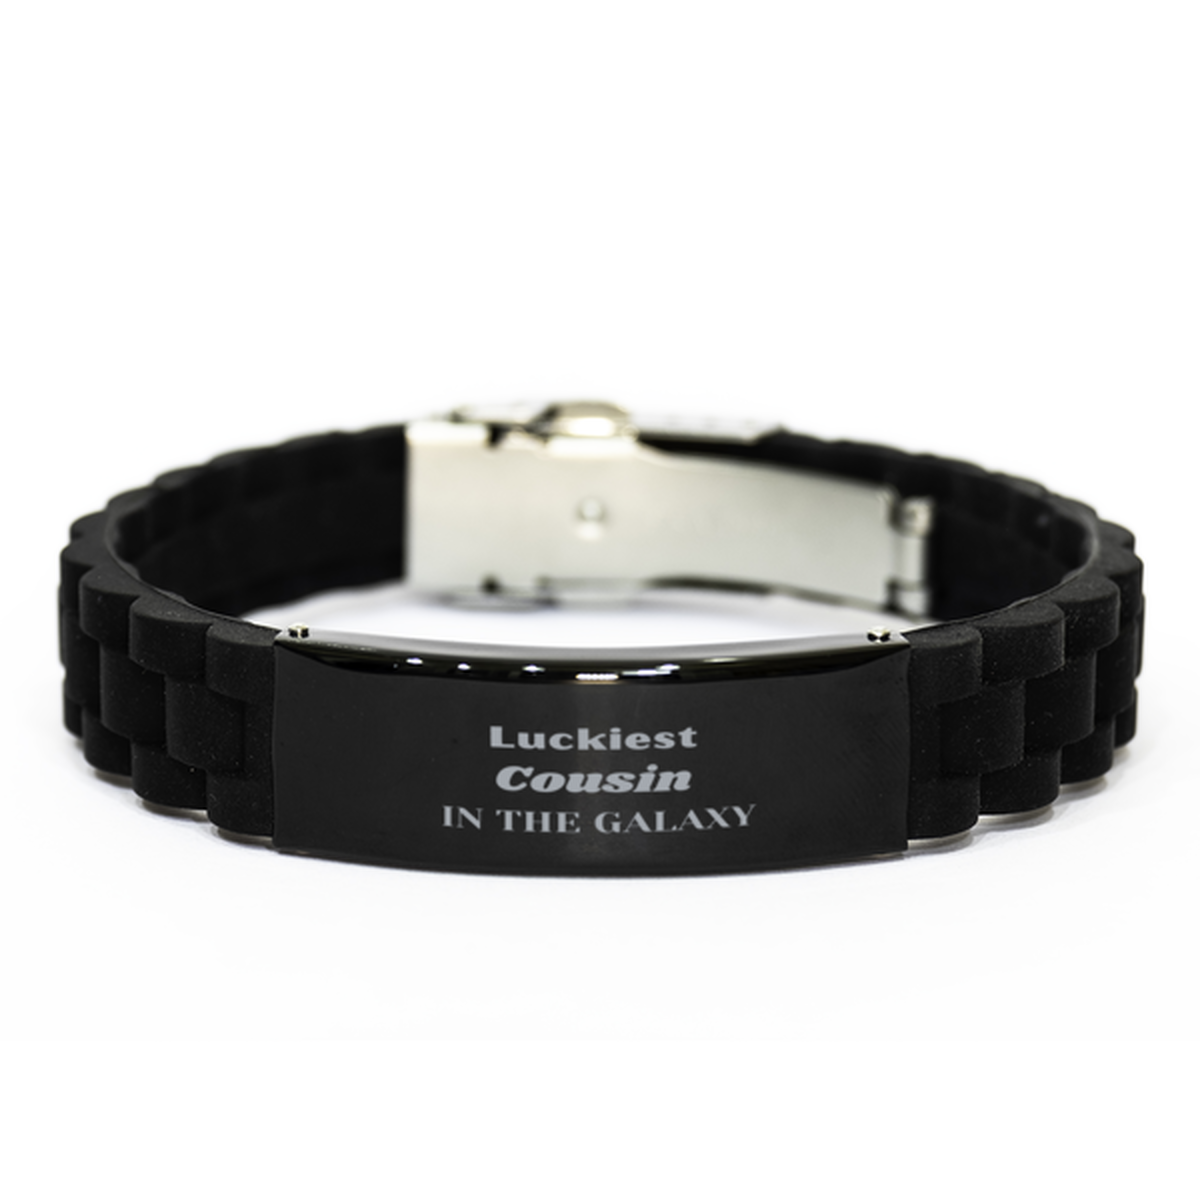 Luckiest Cousin in the Galaxy, To My Cousin Engraved Gifts, Christmas Cousin Black Glidelock Clasp Bracelet Gifts, X-mas Birthday Unique Gifts For Cousin Men Women